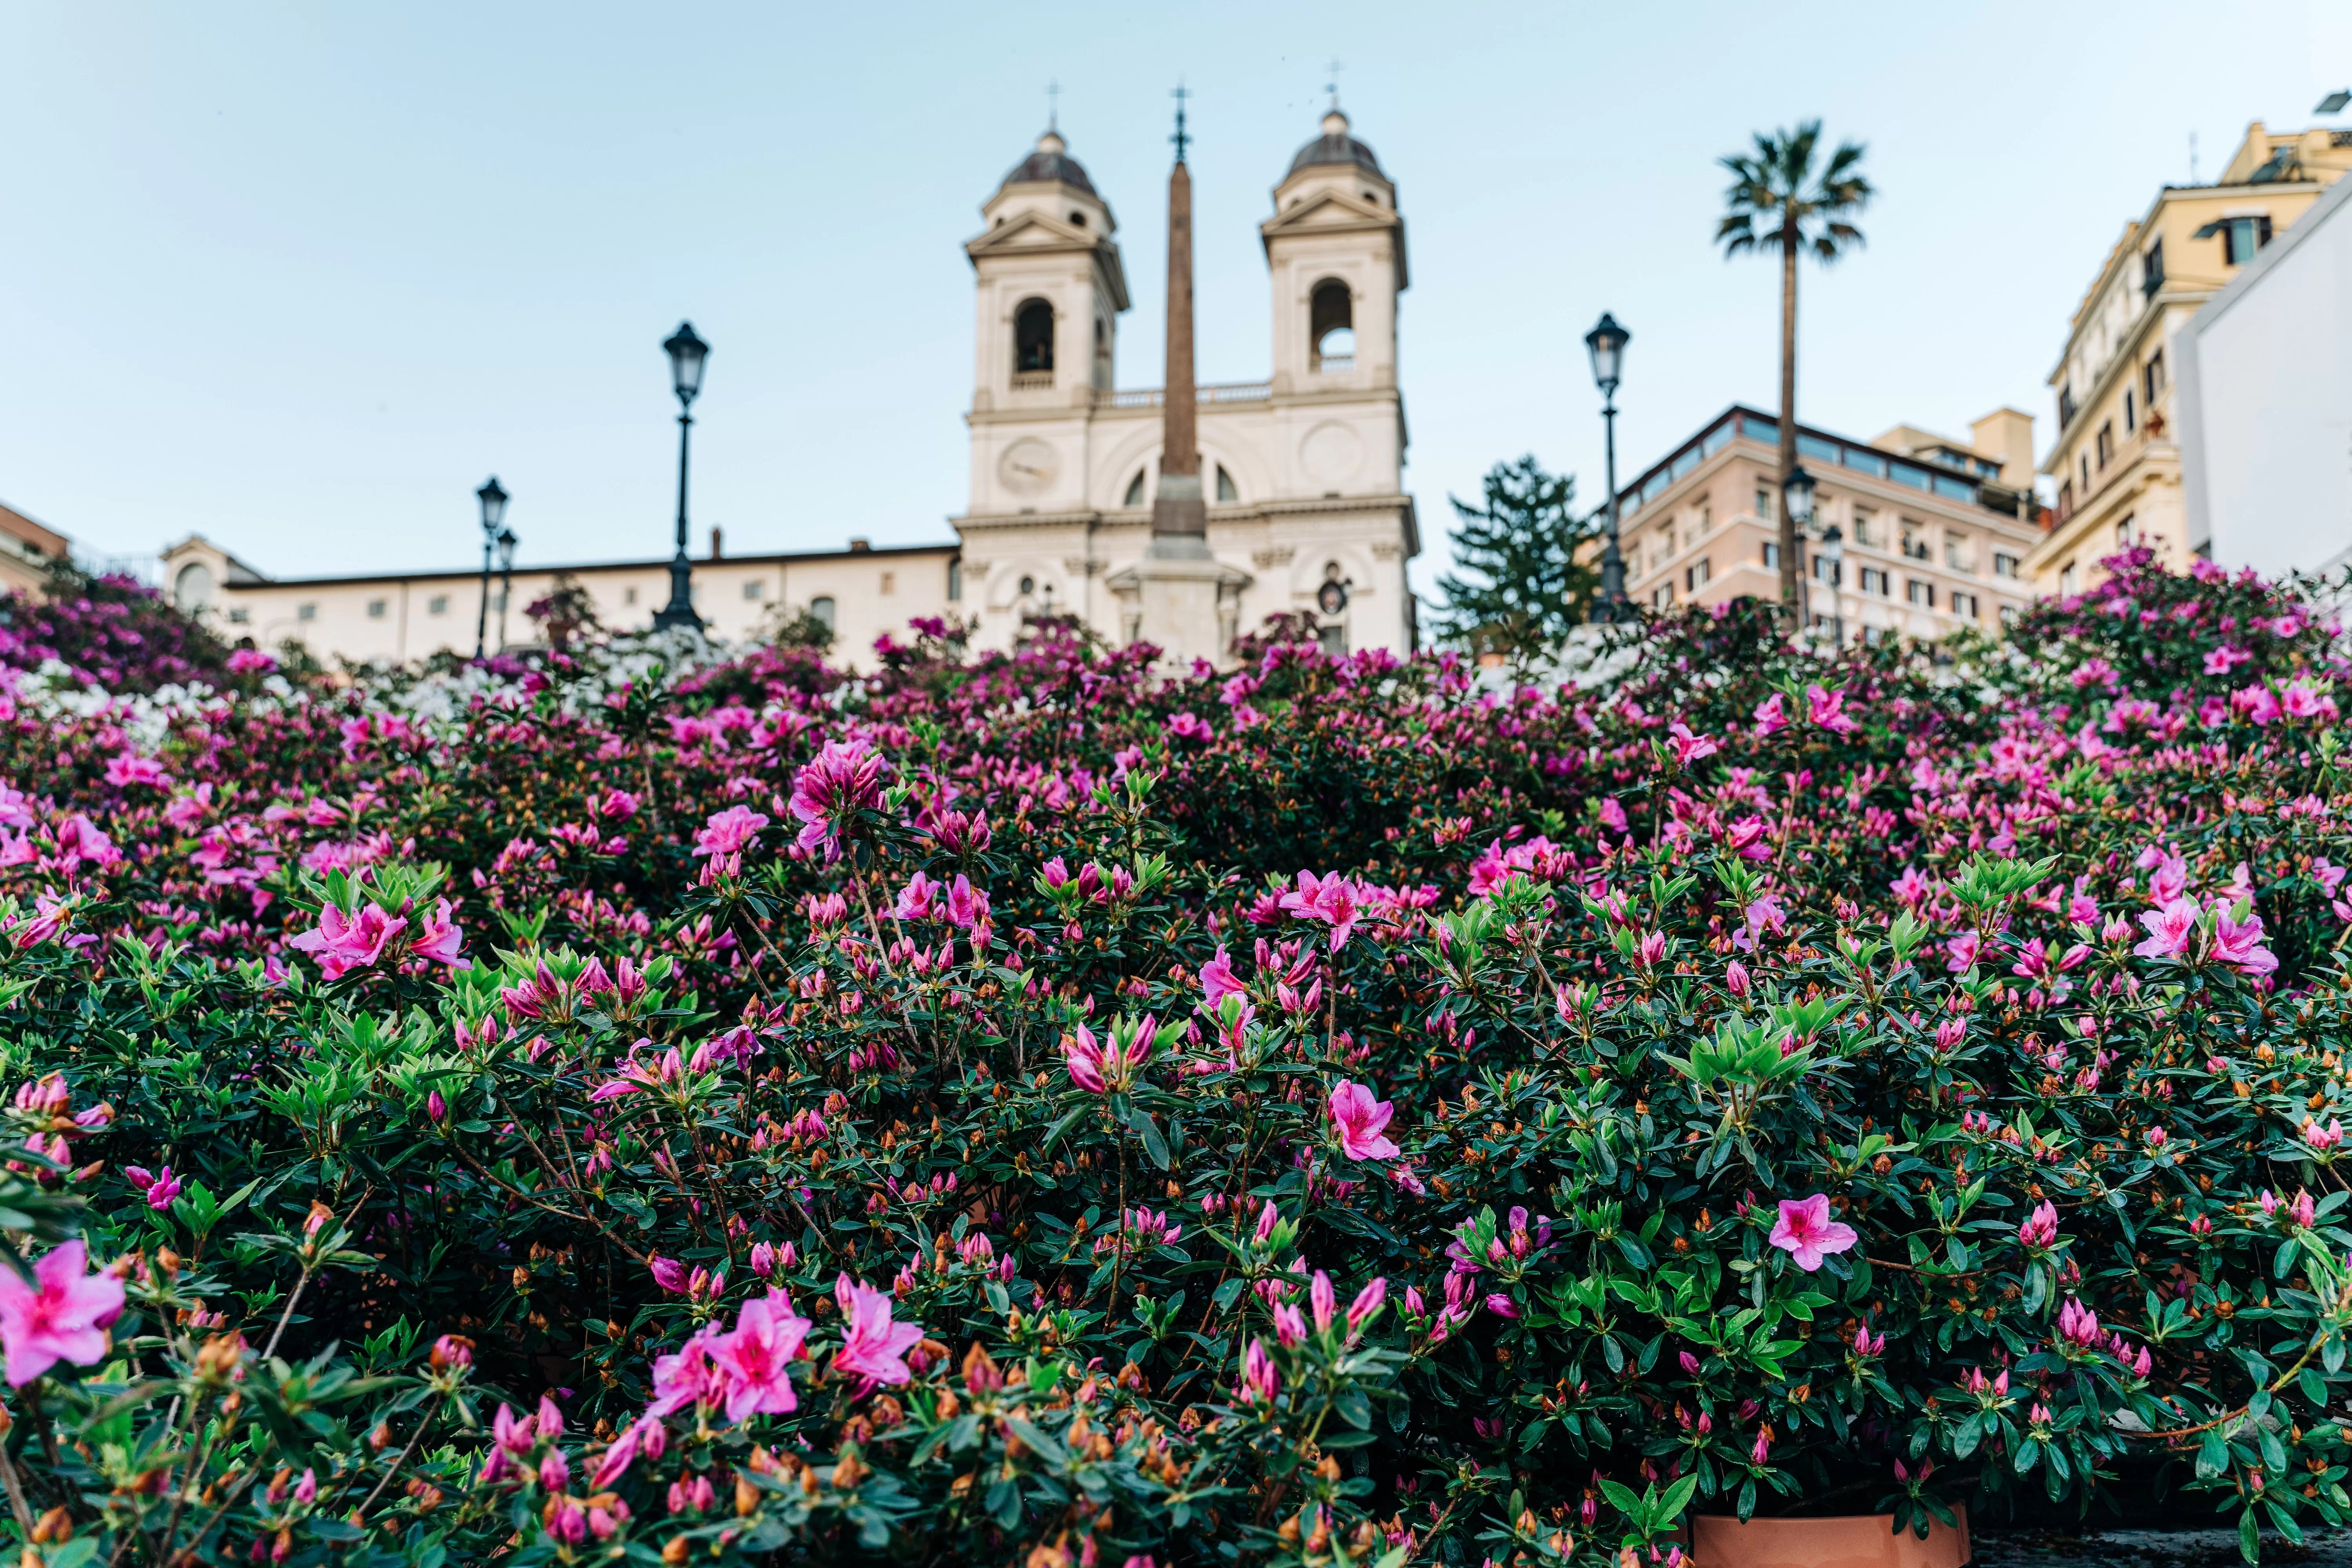 Pink and green flowers with the spanish steps in the background. Rome in spring.